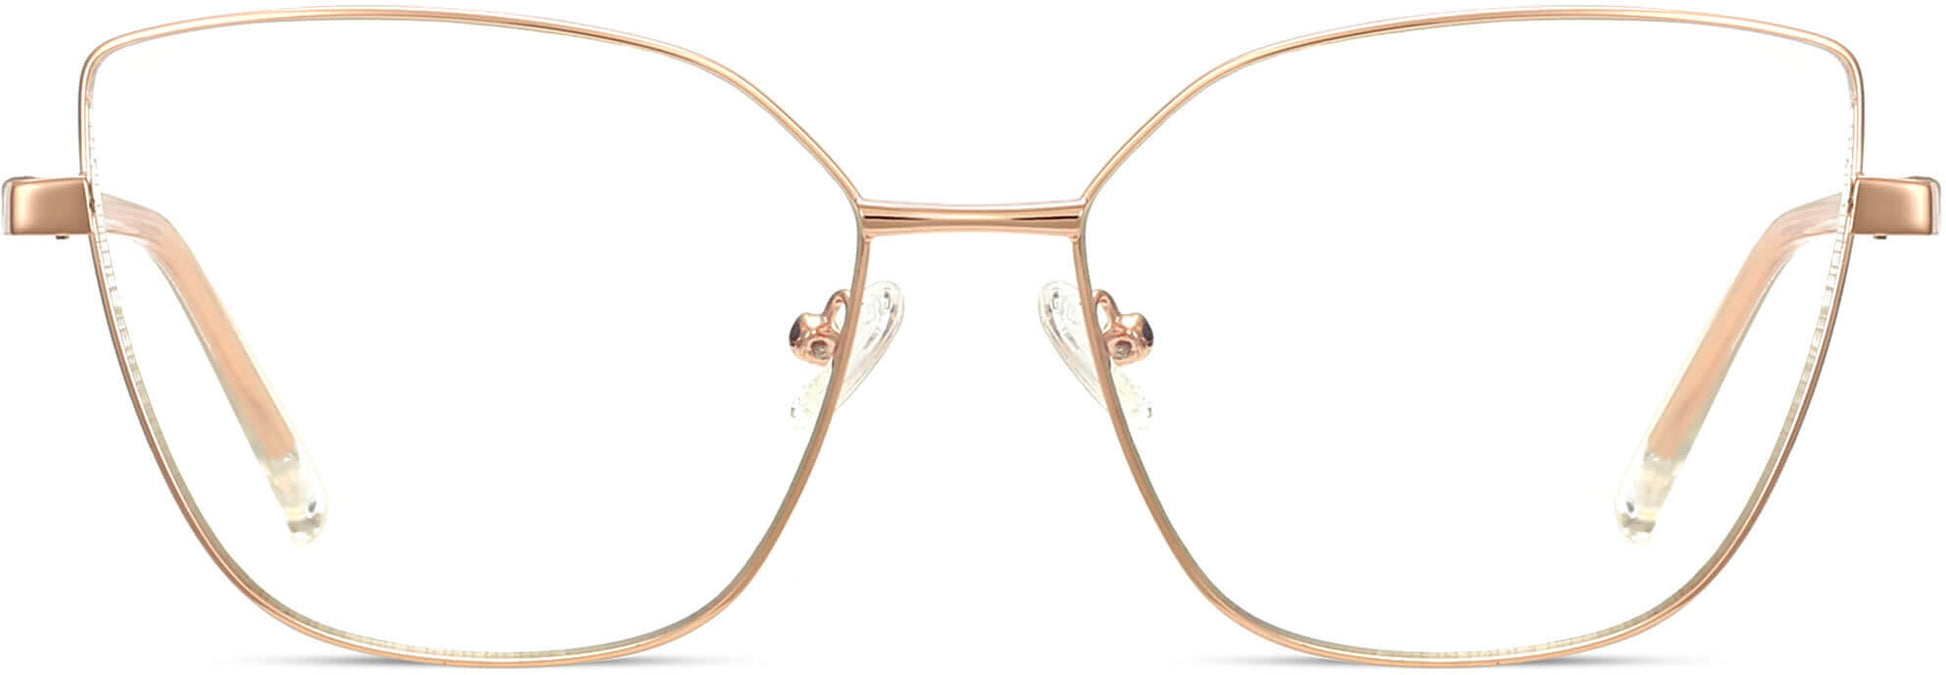 Daisy Cateye Rose Pink Eyeglasses from ANRRI, front view